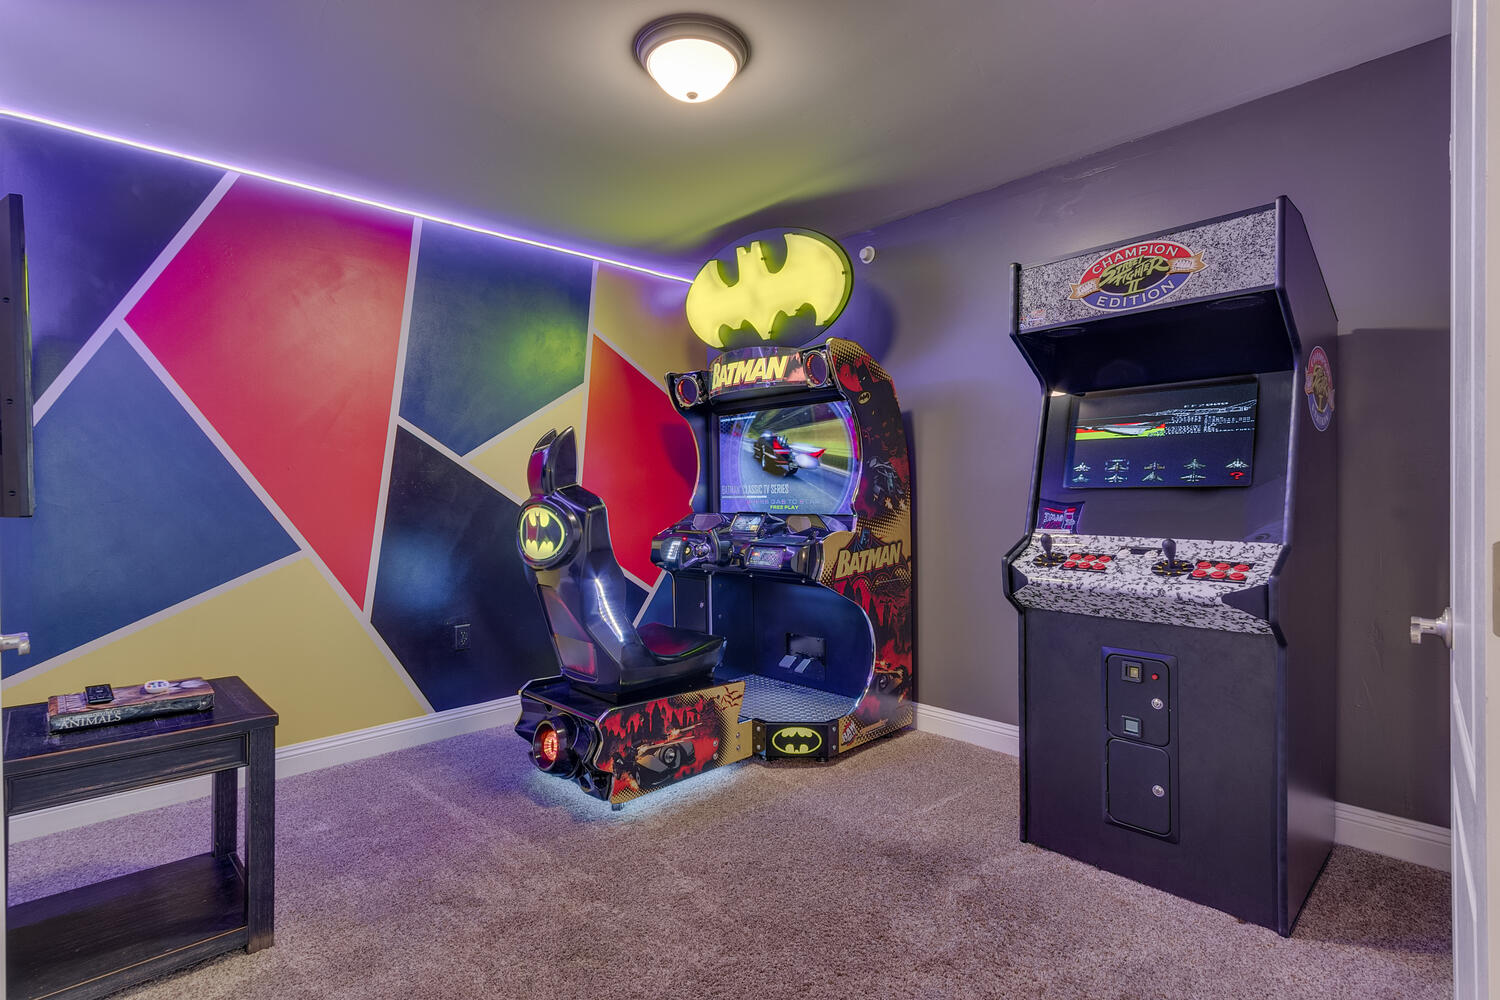 Recreation area with Batman racing arcade and a classic arcade with 60+ games